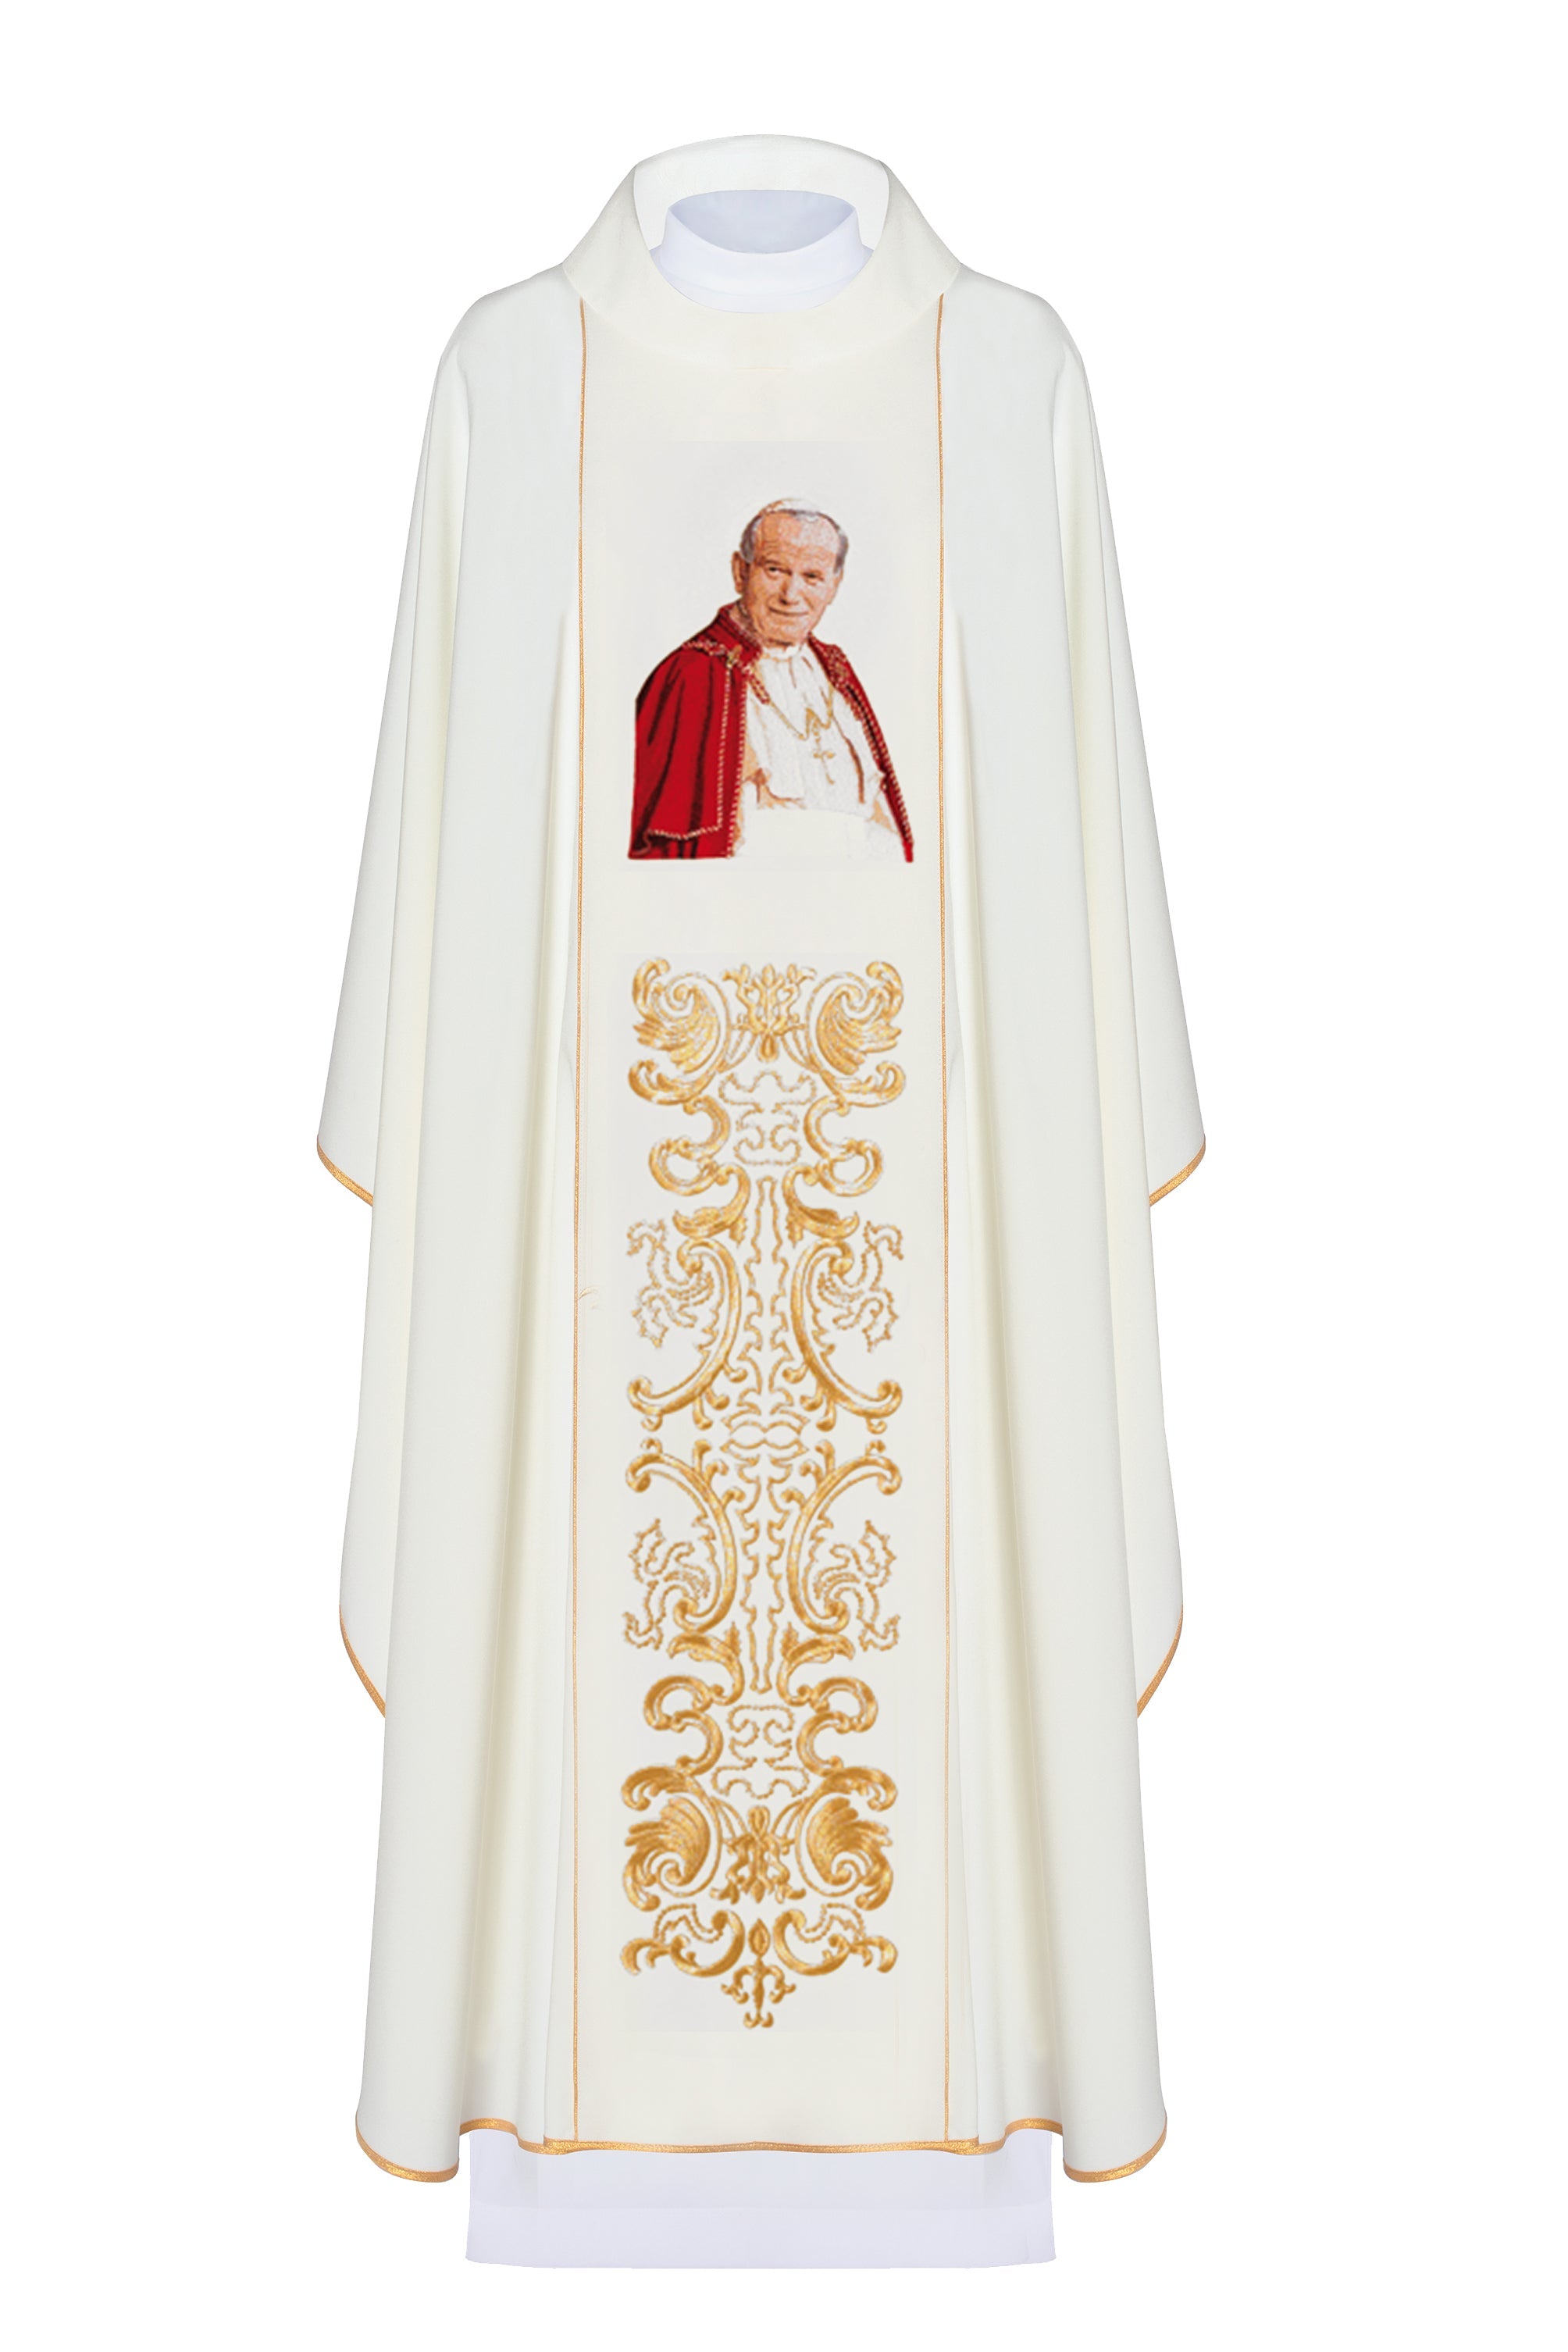 Chasuble with an image of Pope John Paul II